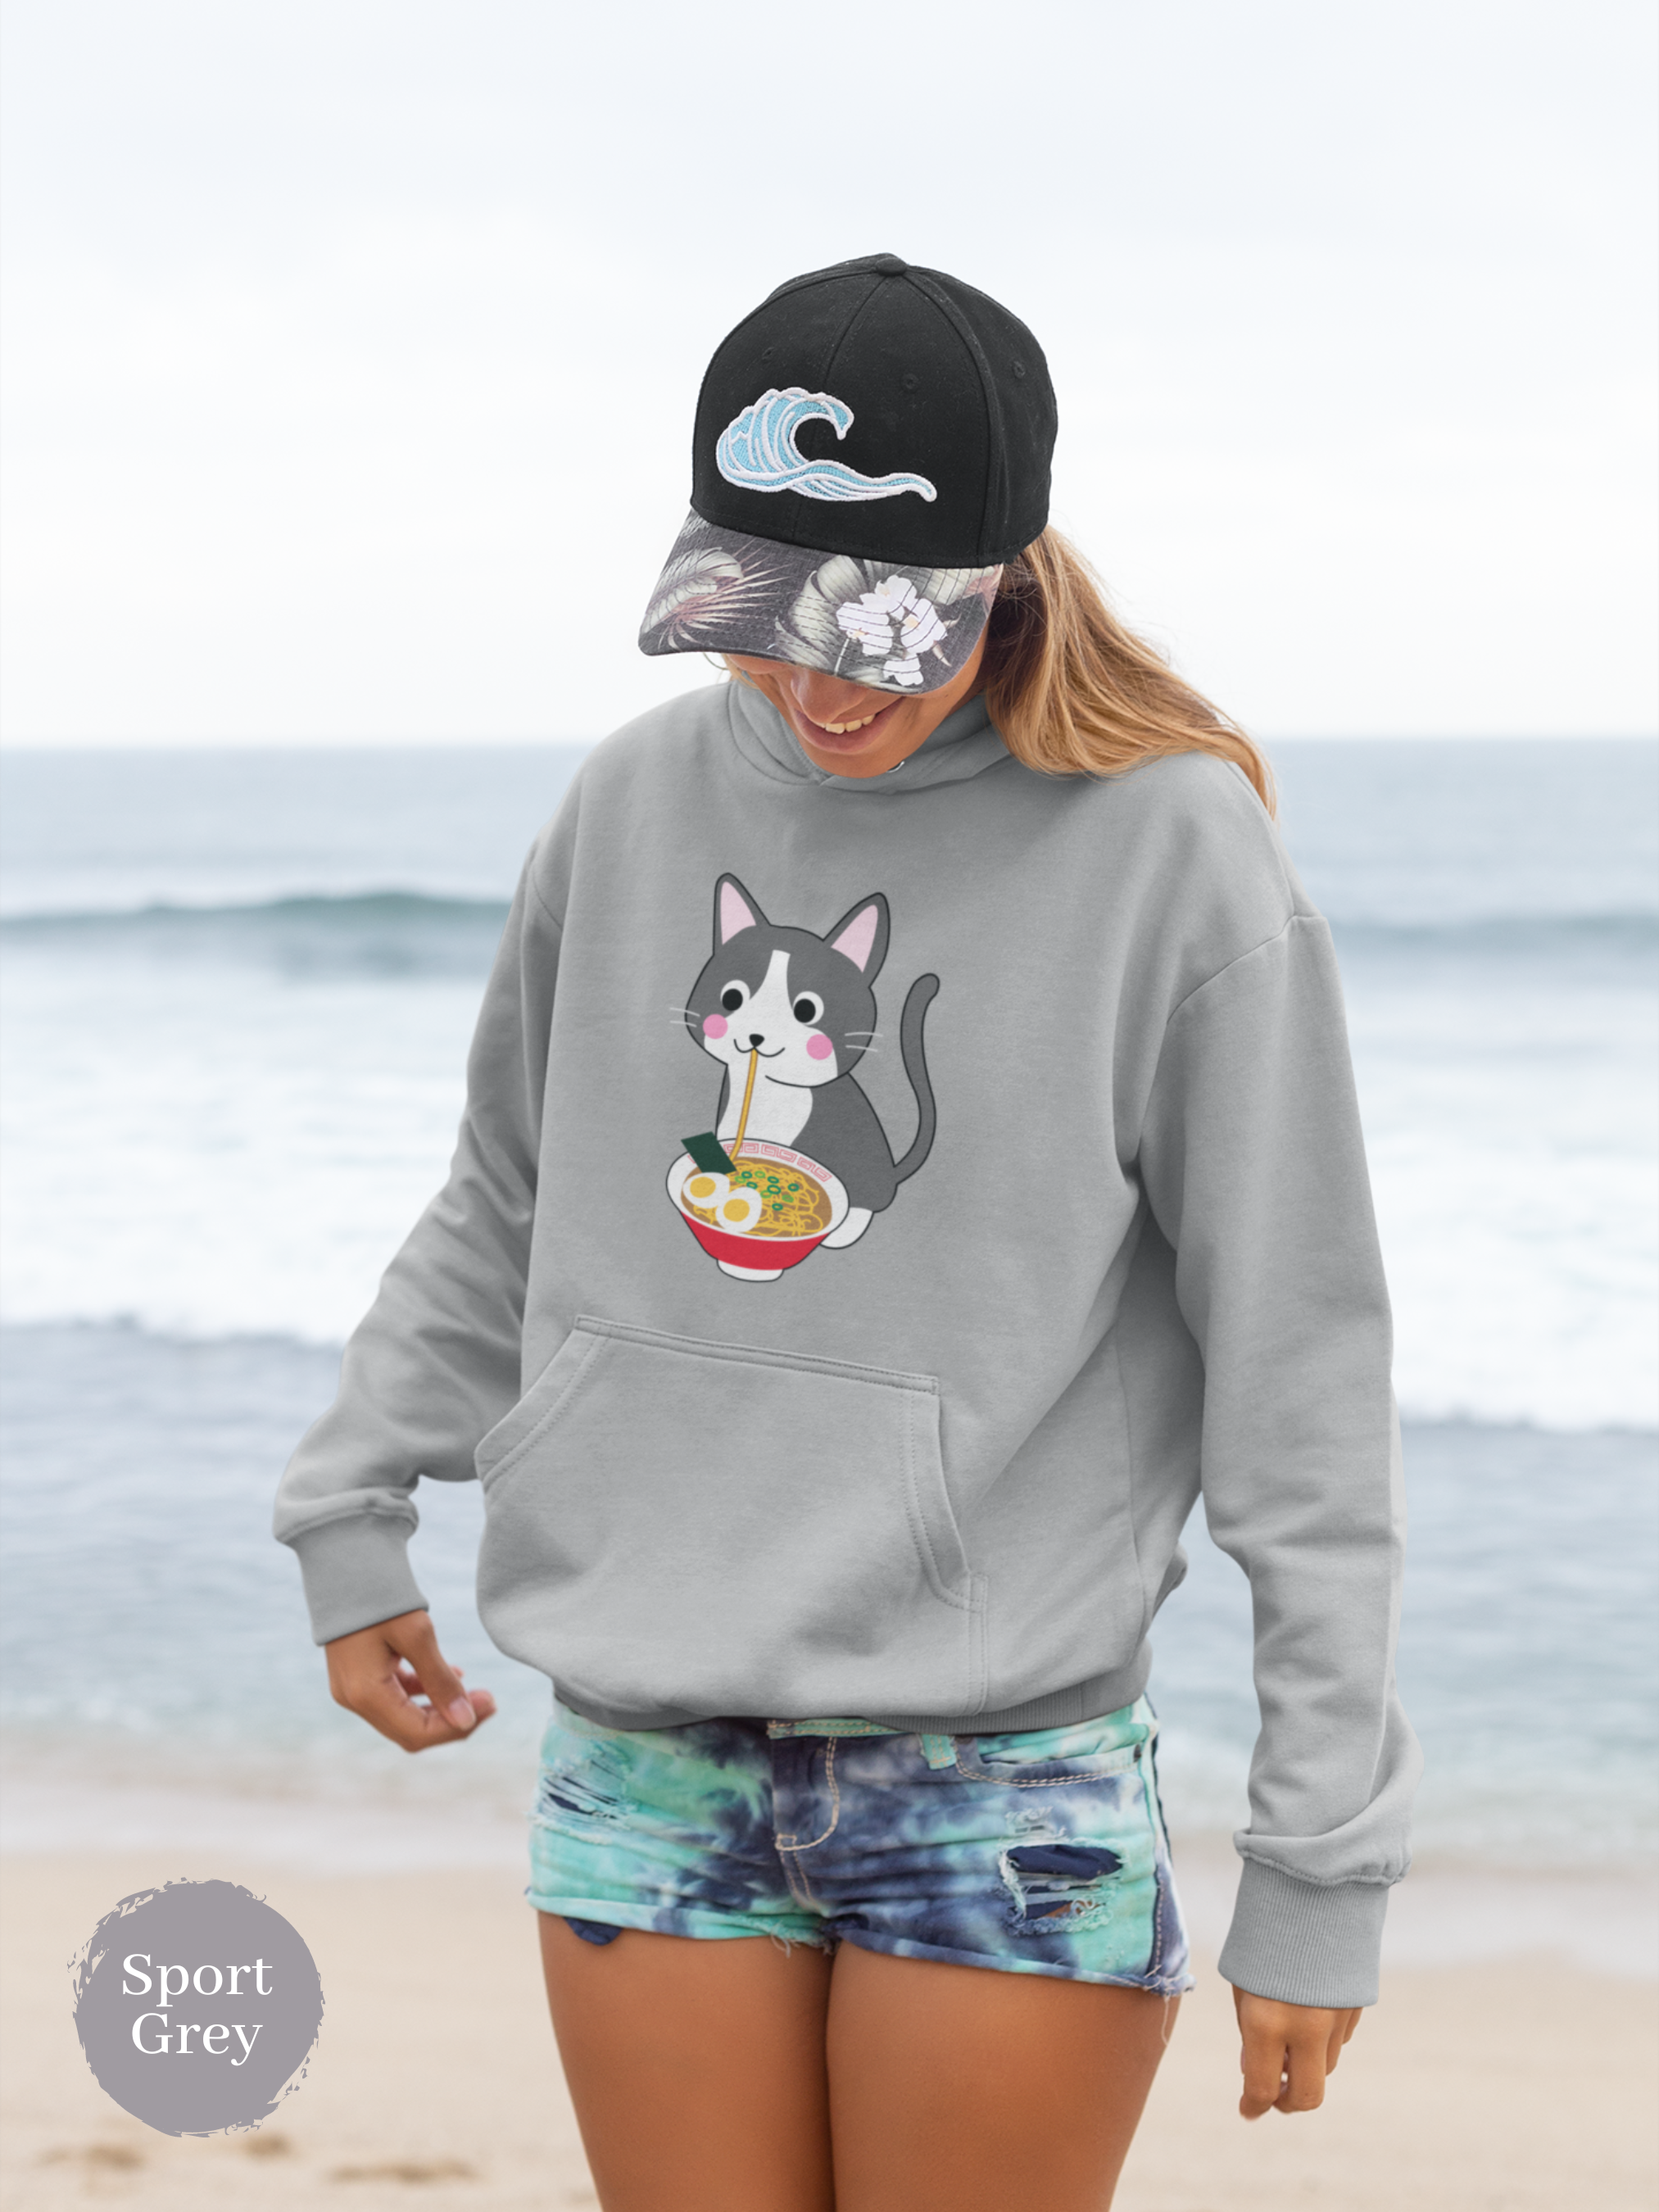 Ramen Hoodie: Noodle Noms with a Meow - An Asian Foodie Hoodie with Cute Ramen Cat Art and Punny Charm